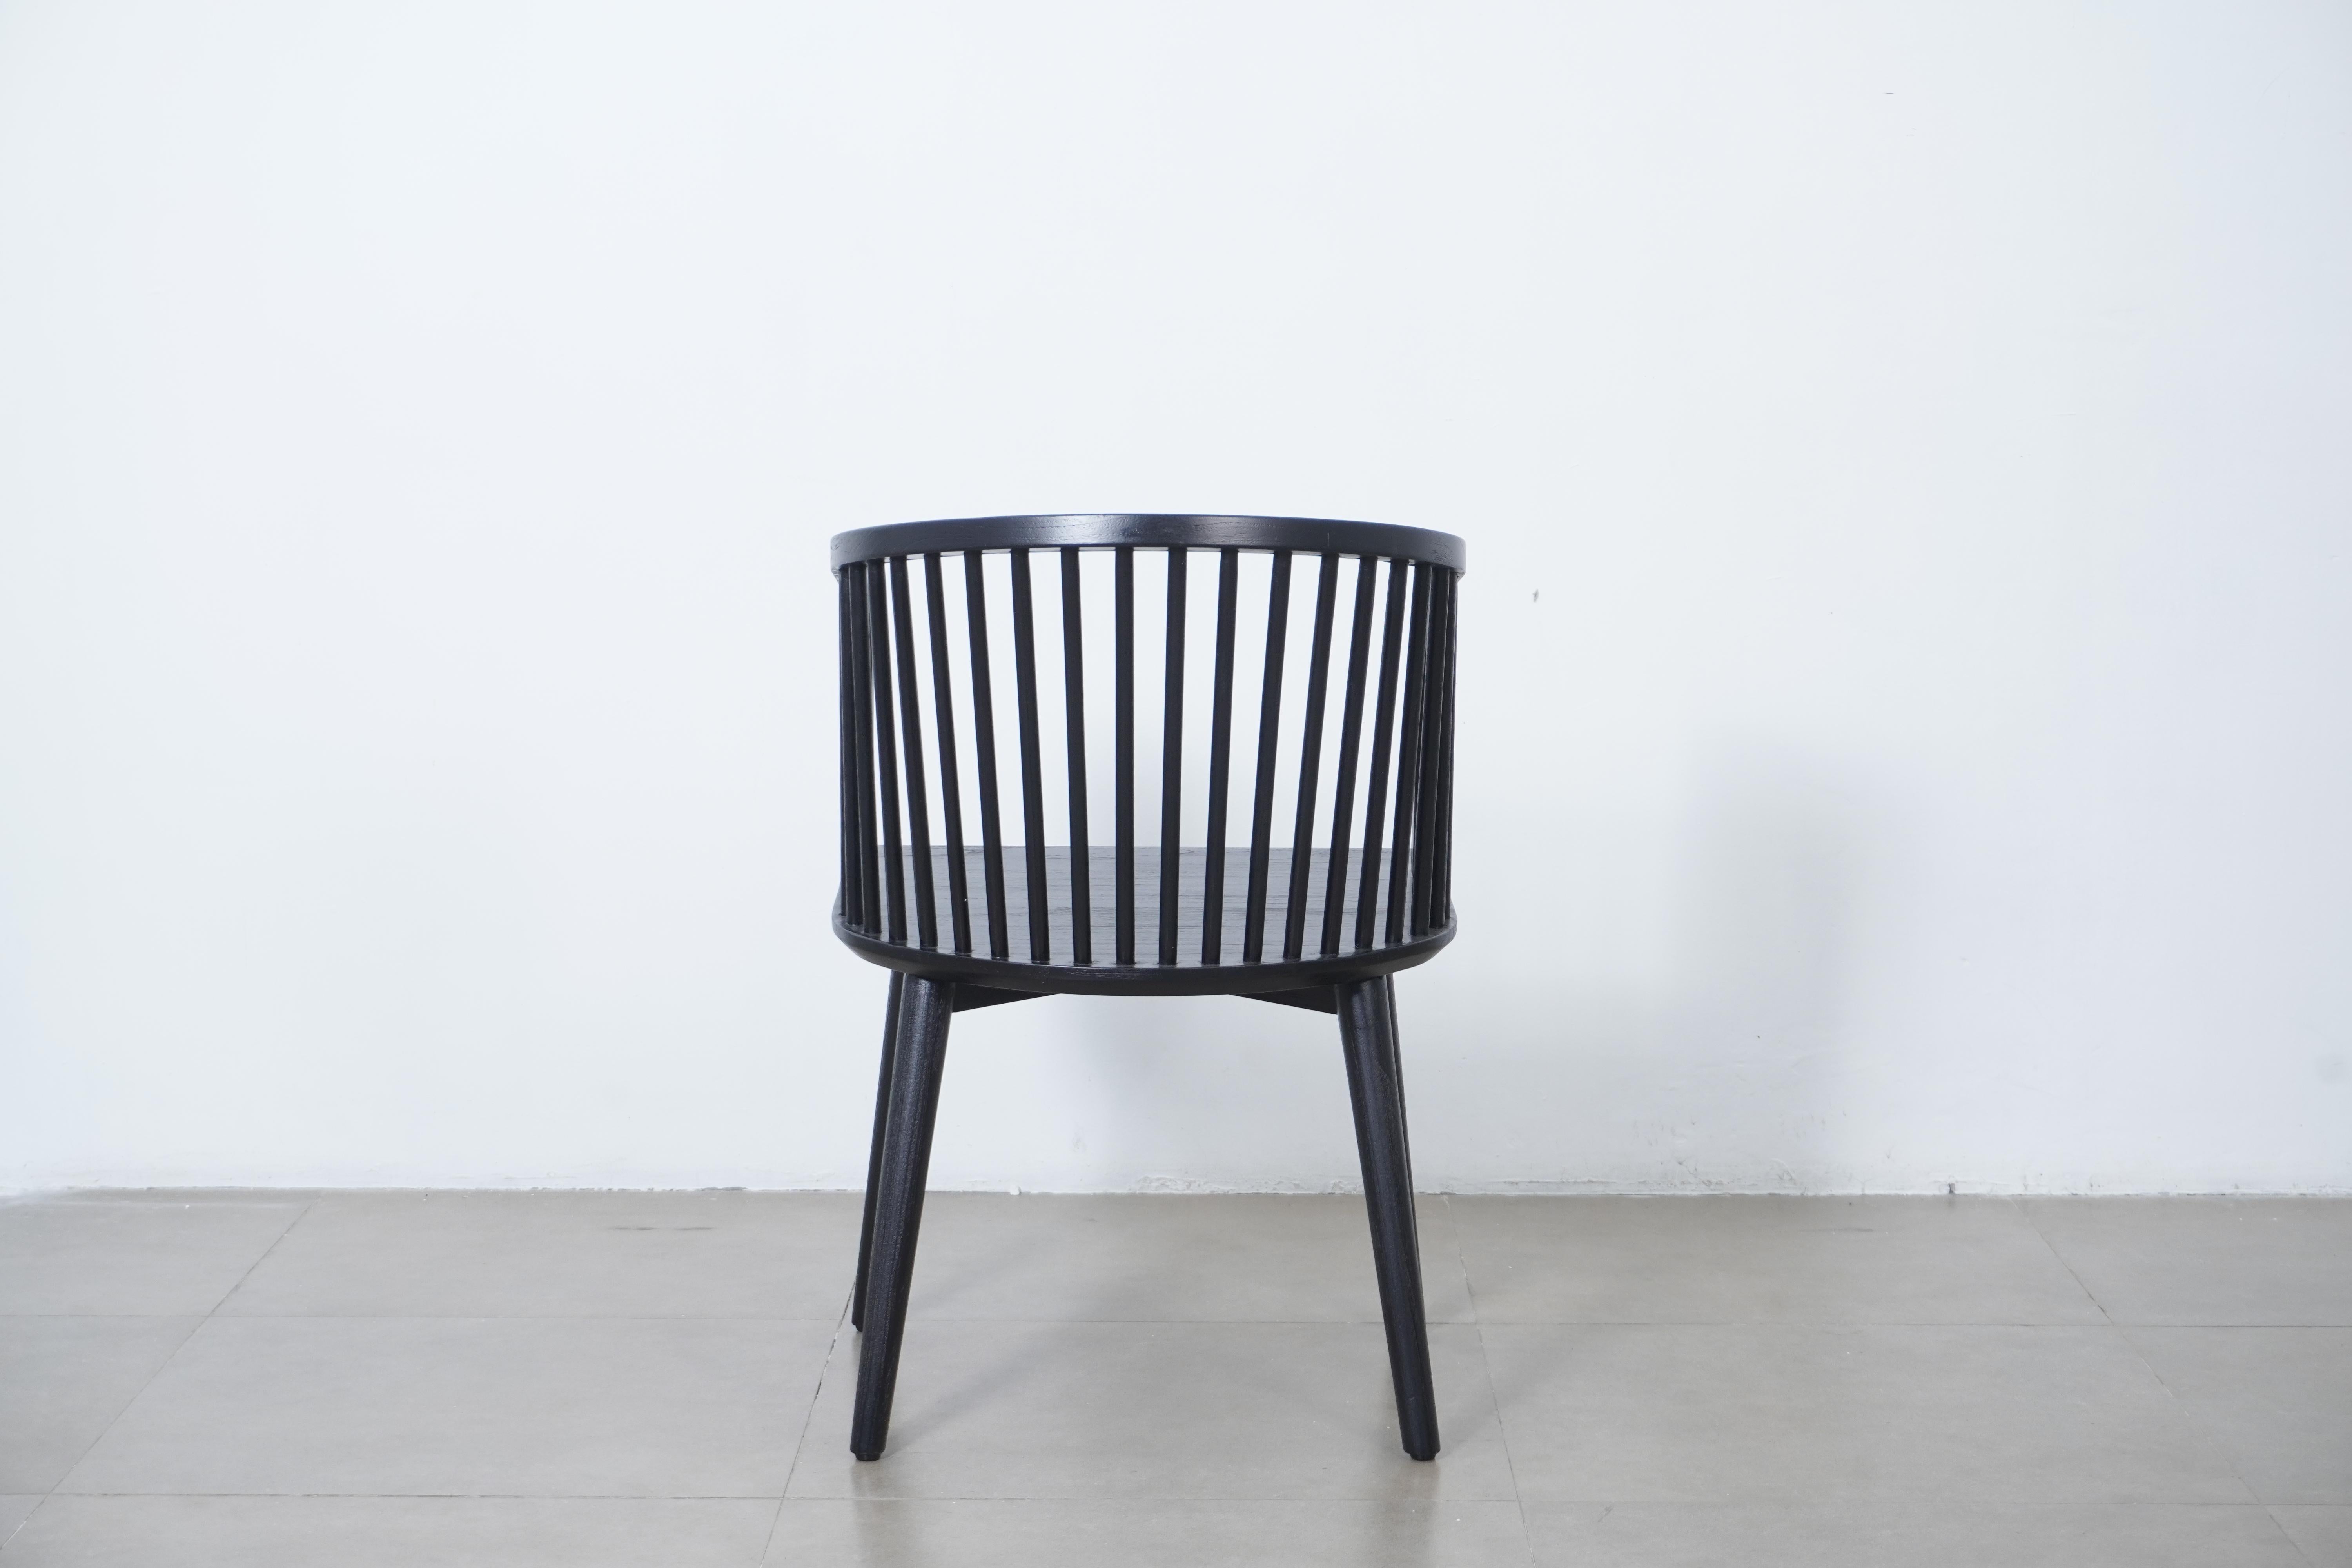 Contemporary Modern Danish Peasant Dining Chair, Teak in Black Finish. Set of 6 chairs For Sale